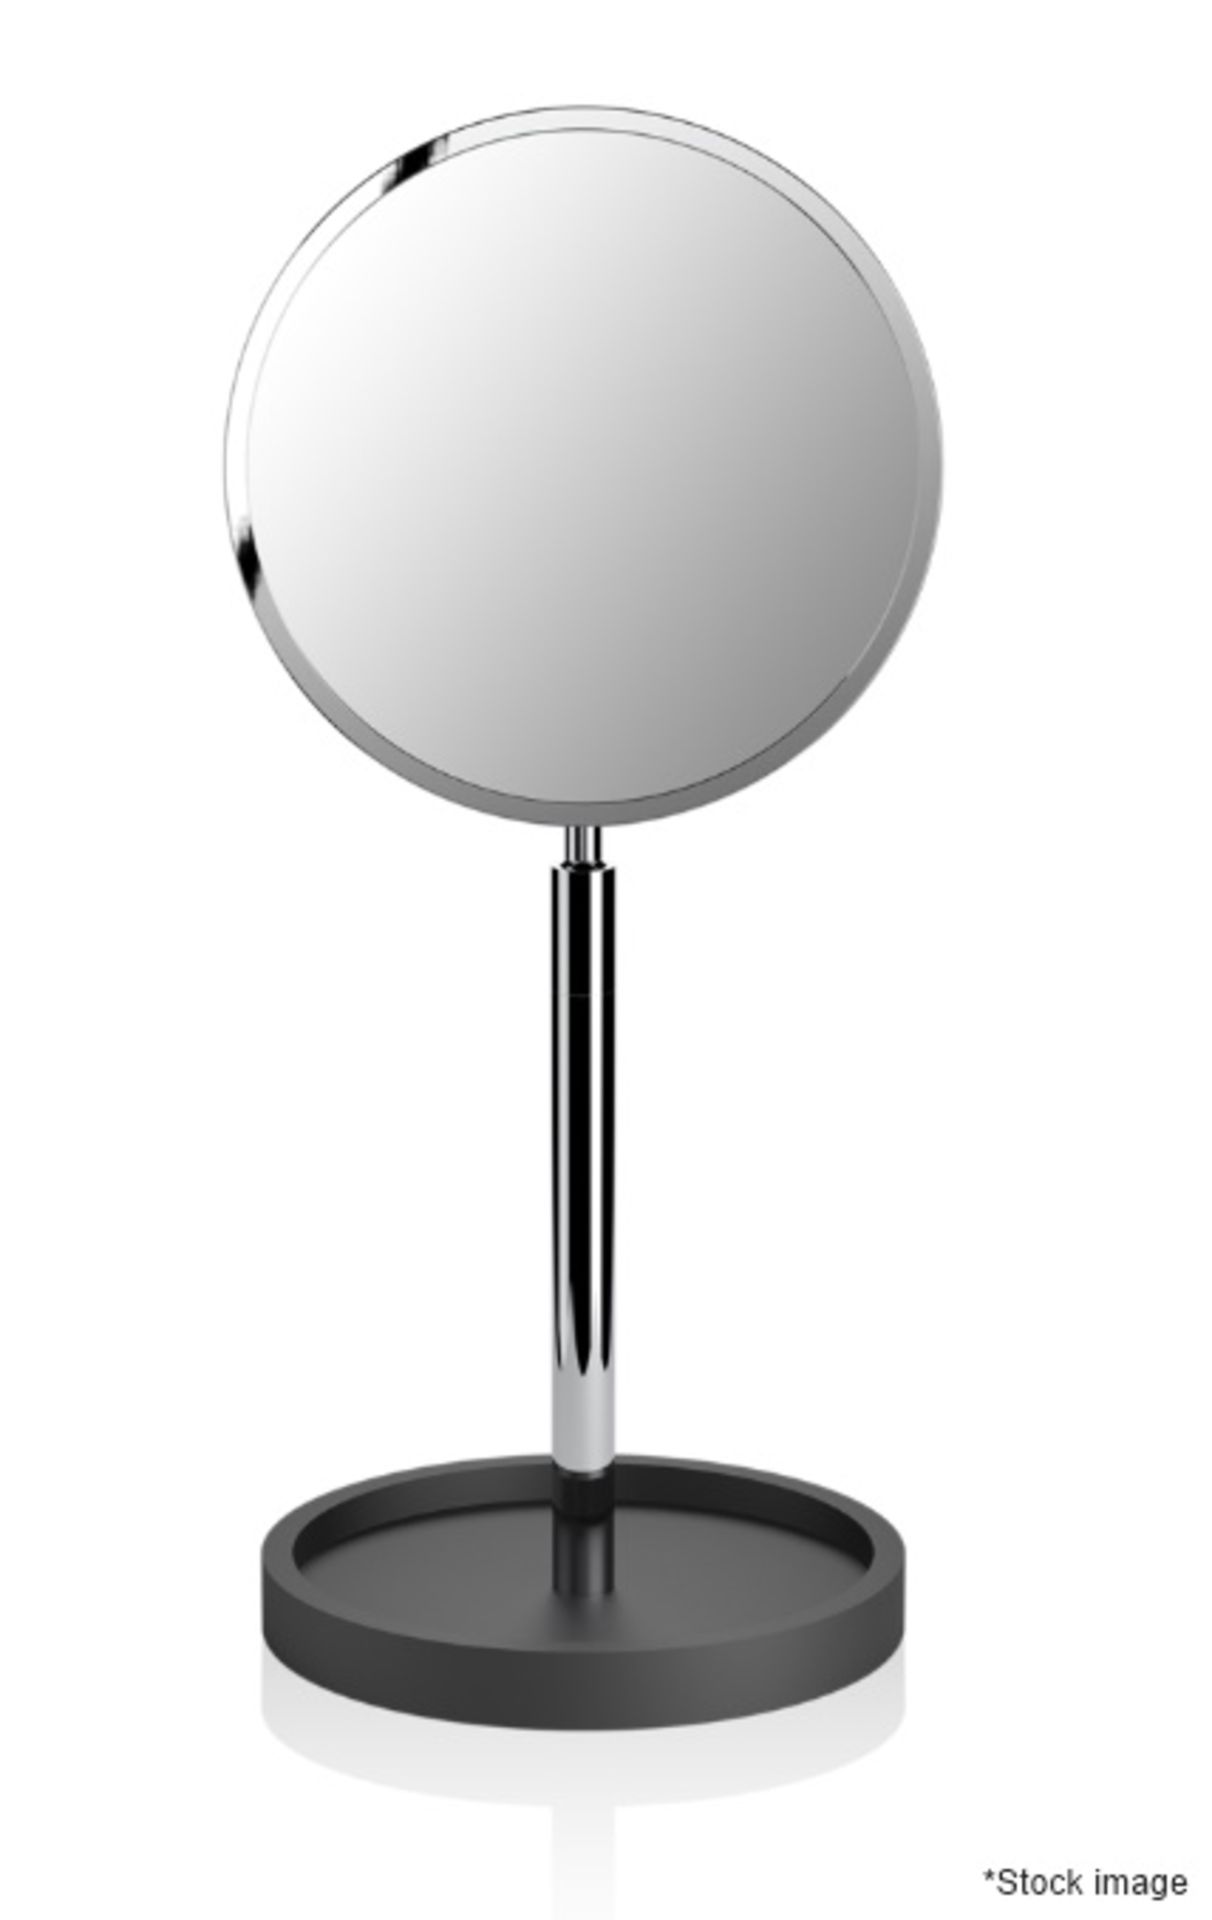 1 x DECOR WALTHER Freestanding Cosmetic Mirror with Stone Tray Base - Ex-Display - Ref: HBK194 /